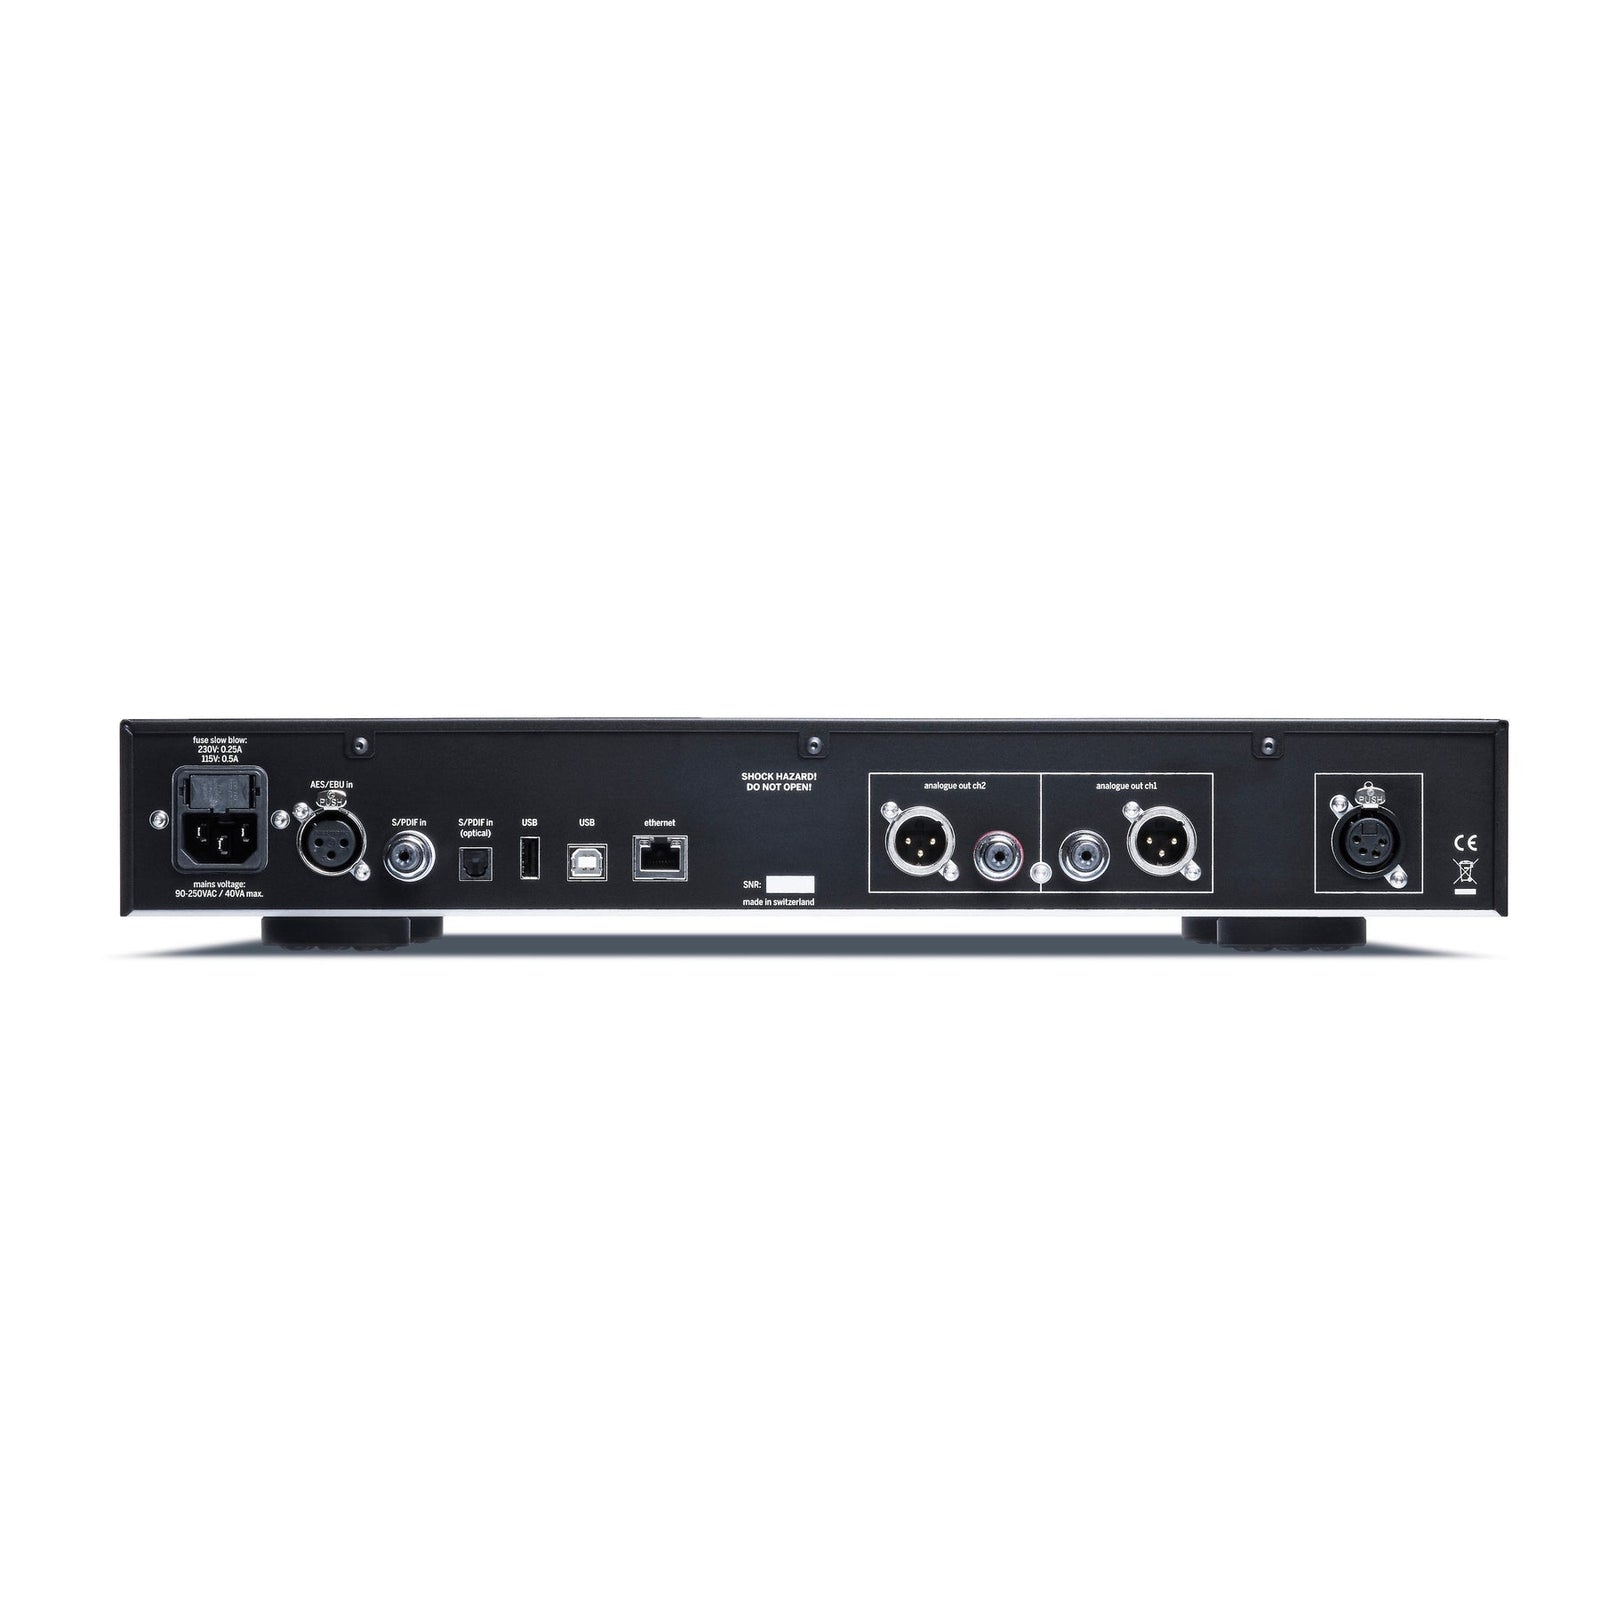 The DAC502 is a state of the art D/A Converter with an unprecedented level of sophistication and versatility. With the DAC502 is creating a new paradigm for what used to be a black box device. A typical D/A Converter is a "set and forget" device. Not so with the DAC502